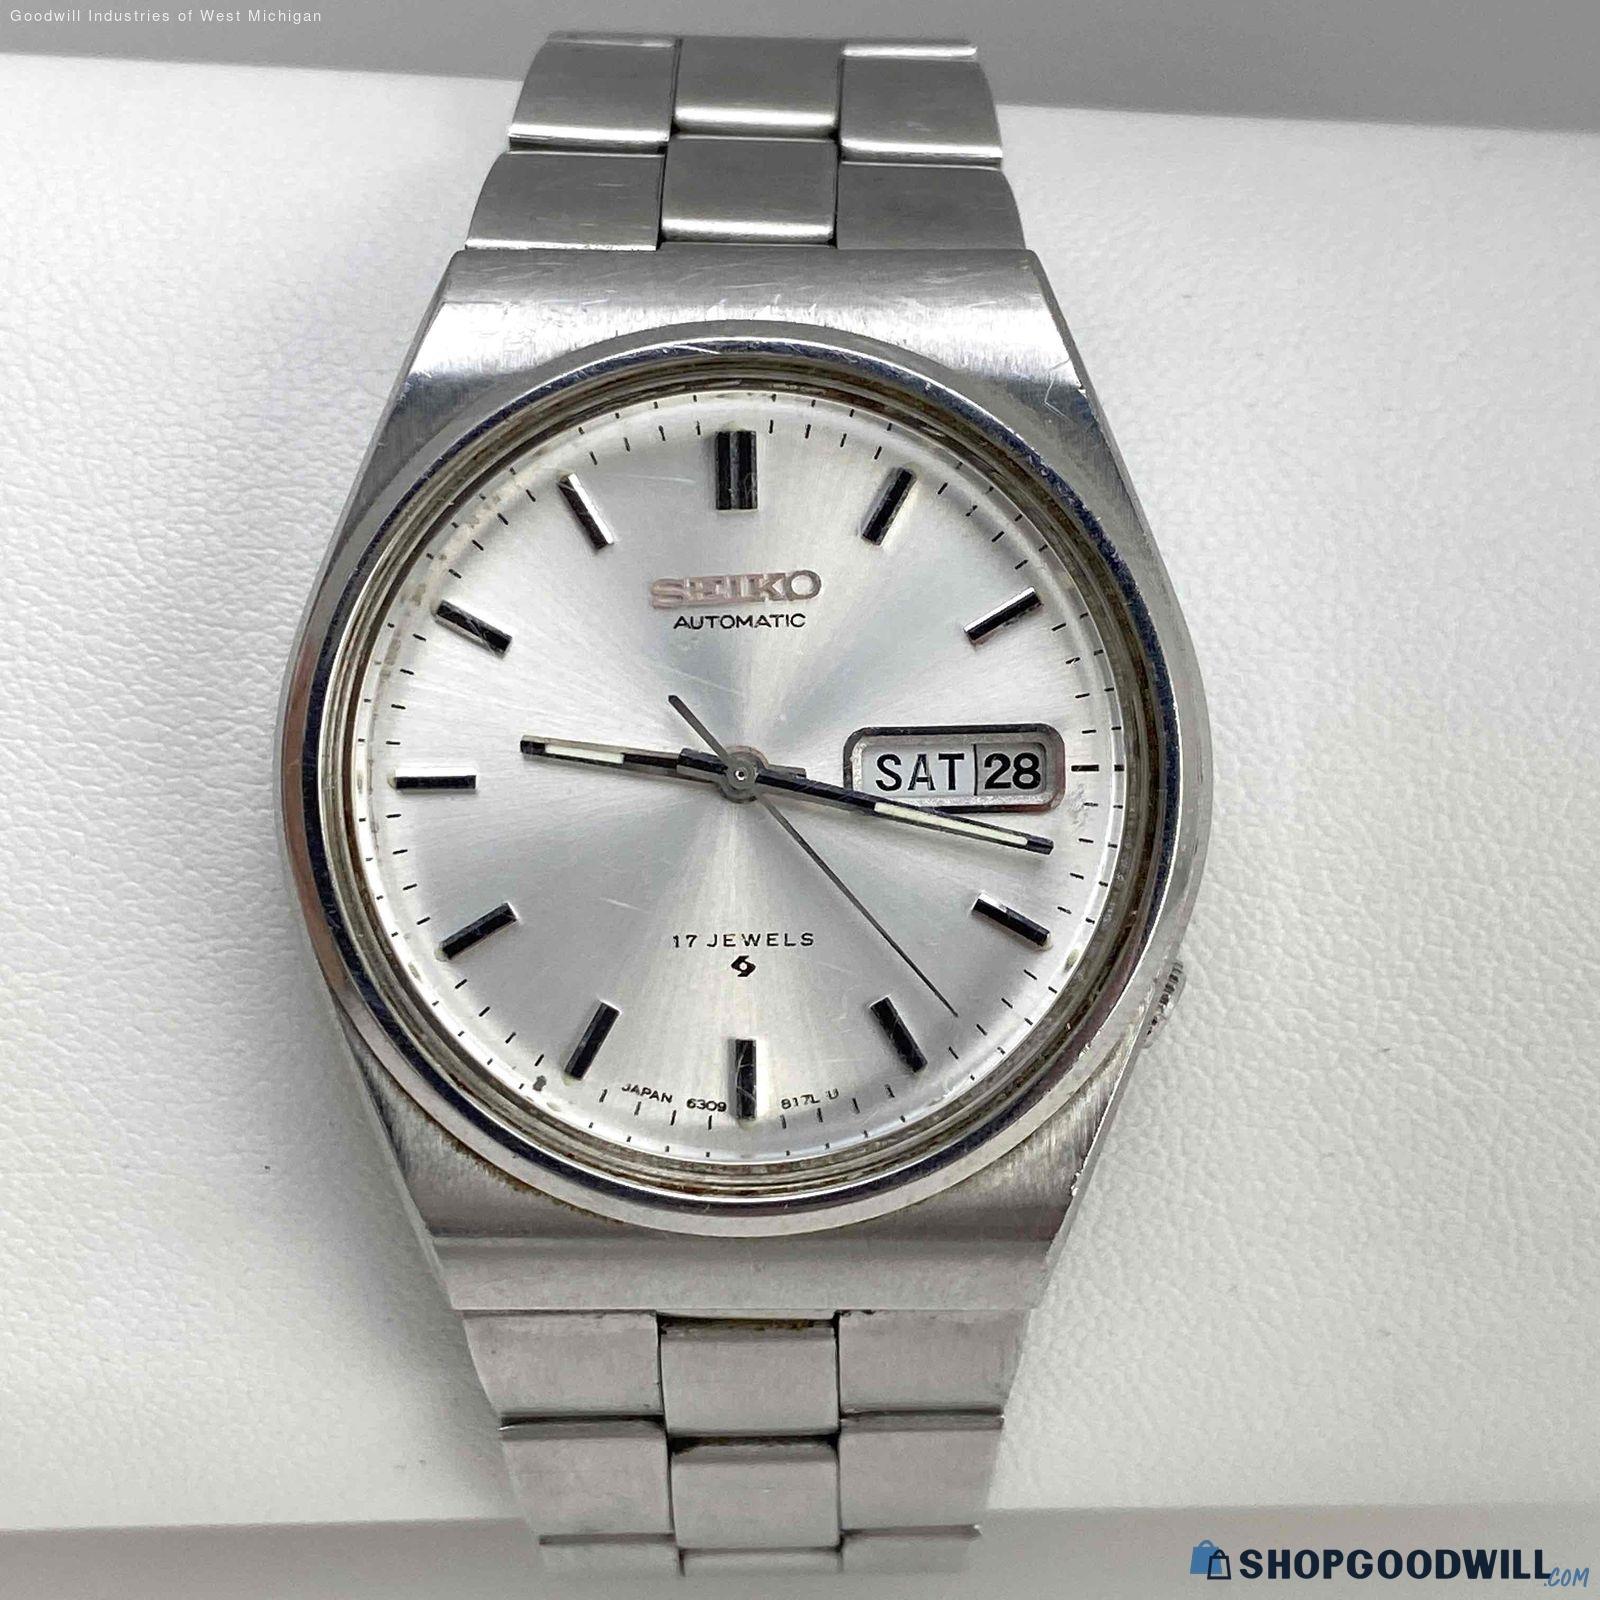 Seiko Automatic 17 Jewels Day/Date Men's Watch 6309-8159 - 84.6 g ...